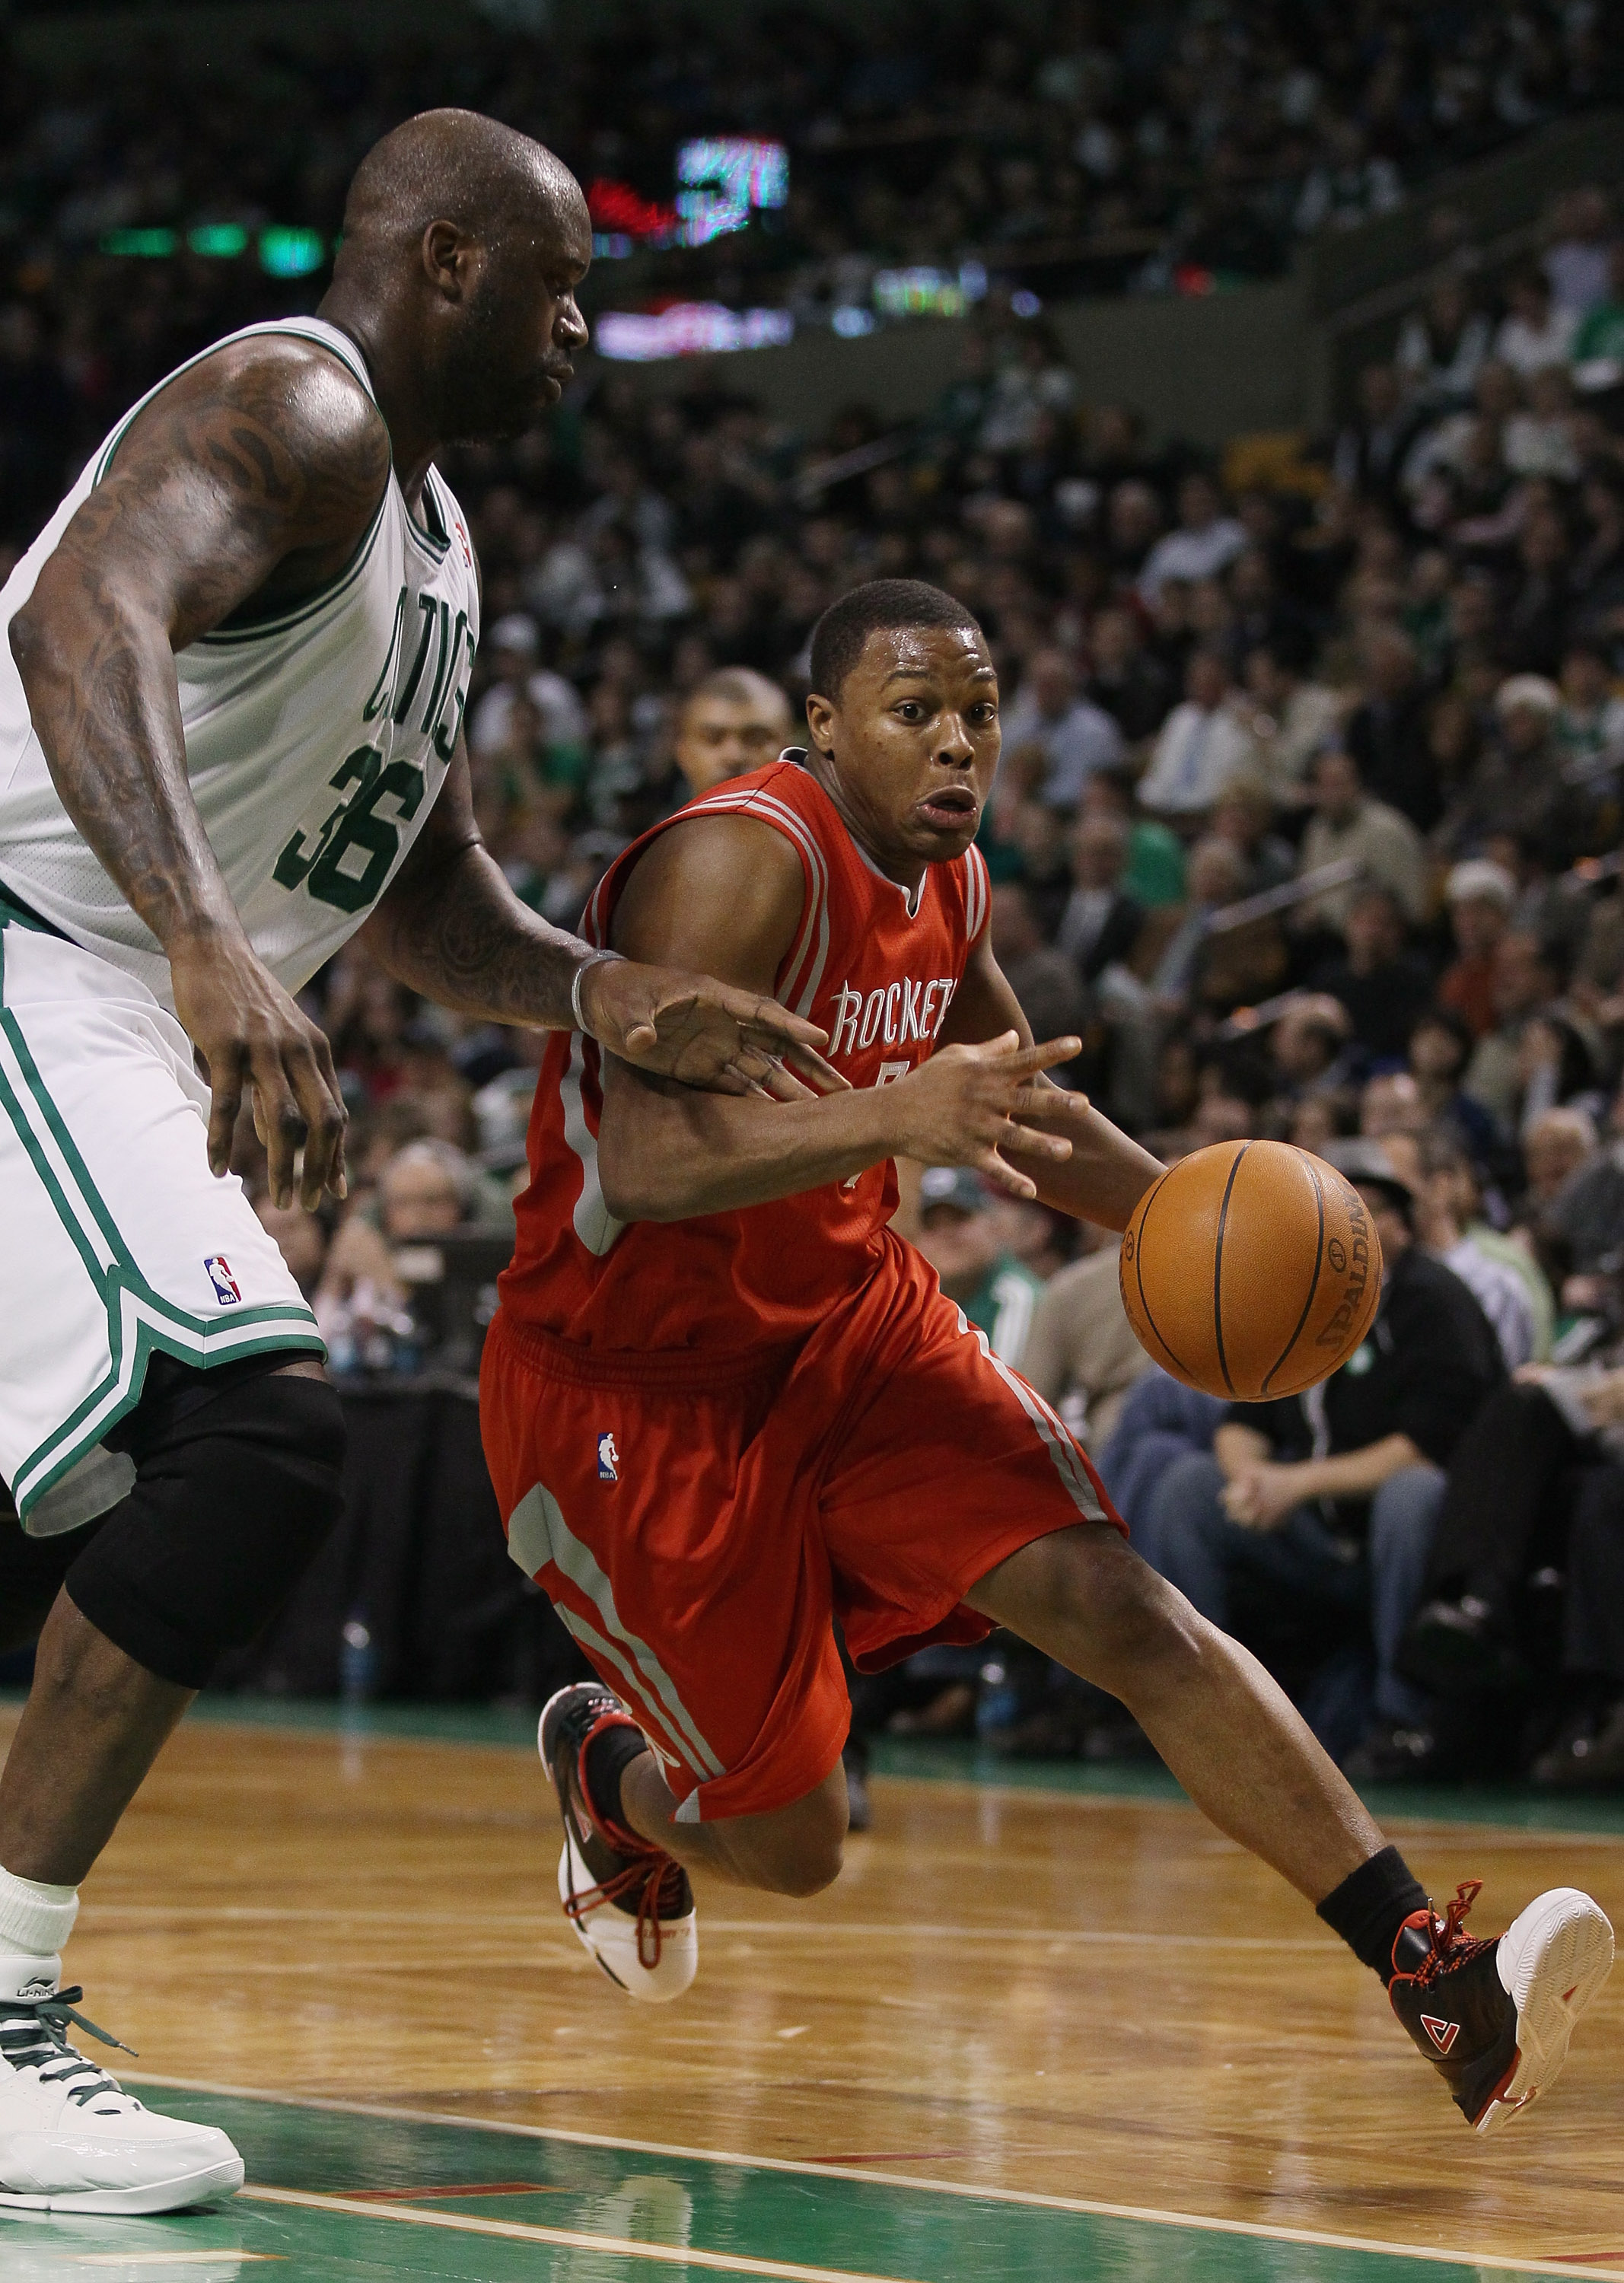 BOSTON, MA - JANUARY 10:  Kyle Lowry #7 of the Houston Rockets drives around Shaquille O'Neal #37 of the Boston Celtics on January 10, 2011 at the TD Garden in Boston, Massachusetts.  The Rockets defeated the Celtics 108-102. NOTE TO USER: User expressly